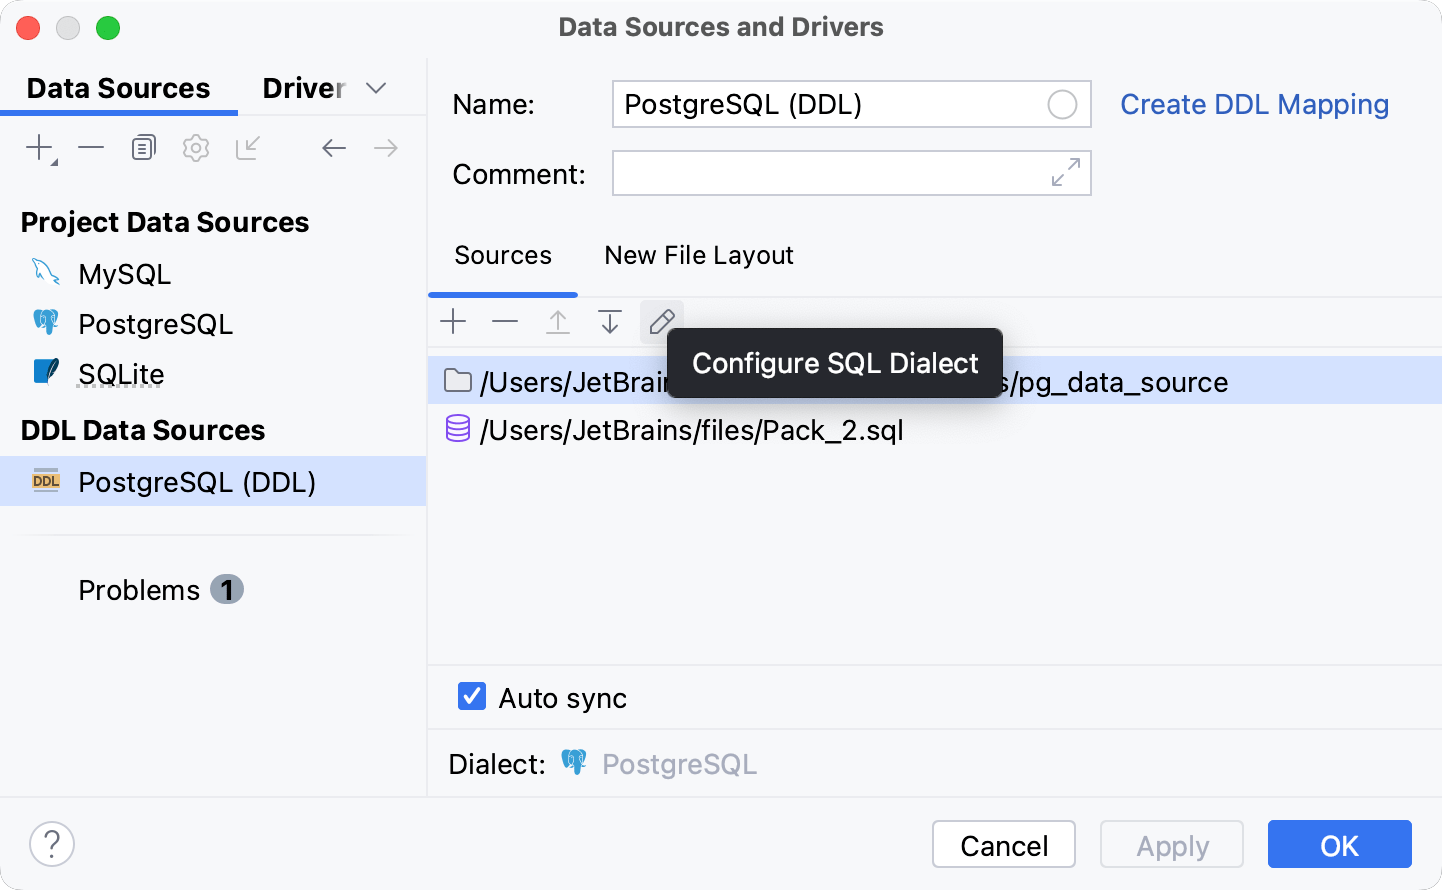 Set a dialect for SQL files in the DDL data source